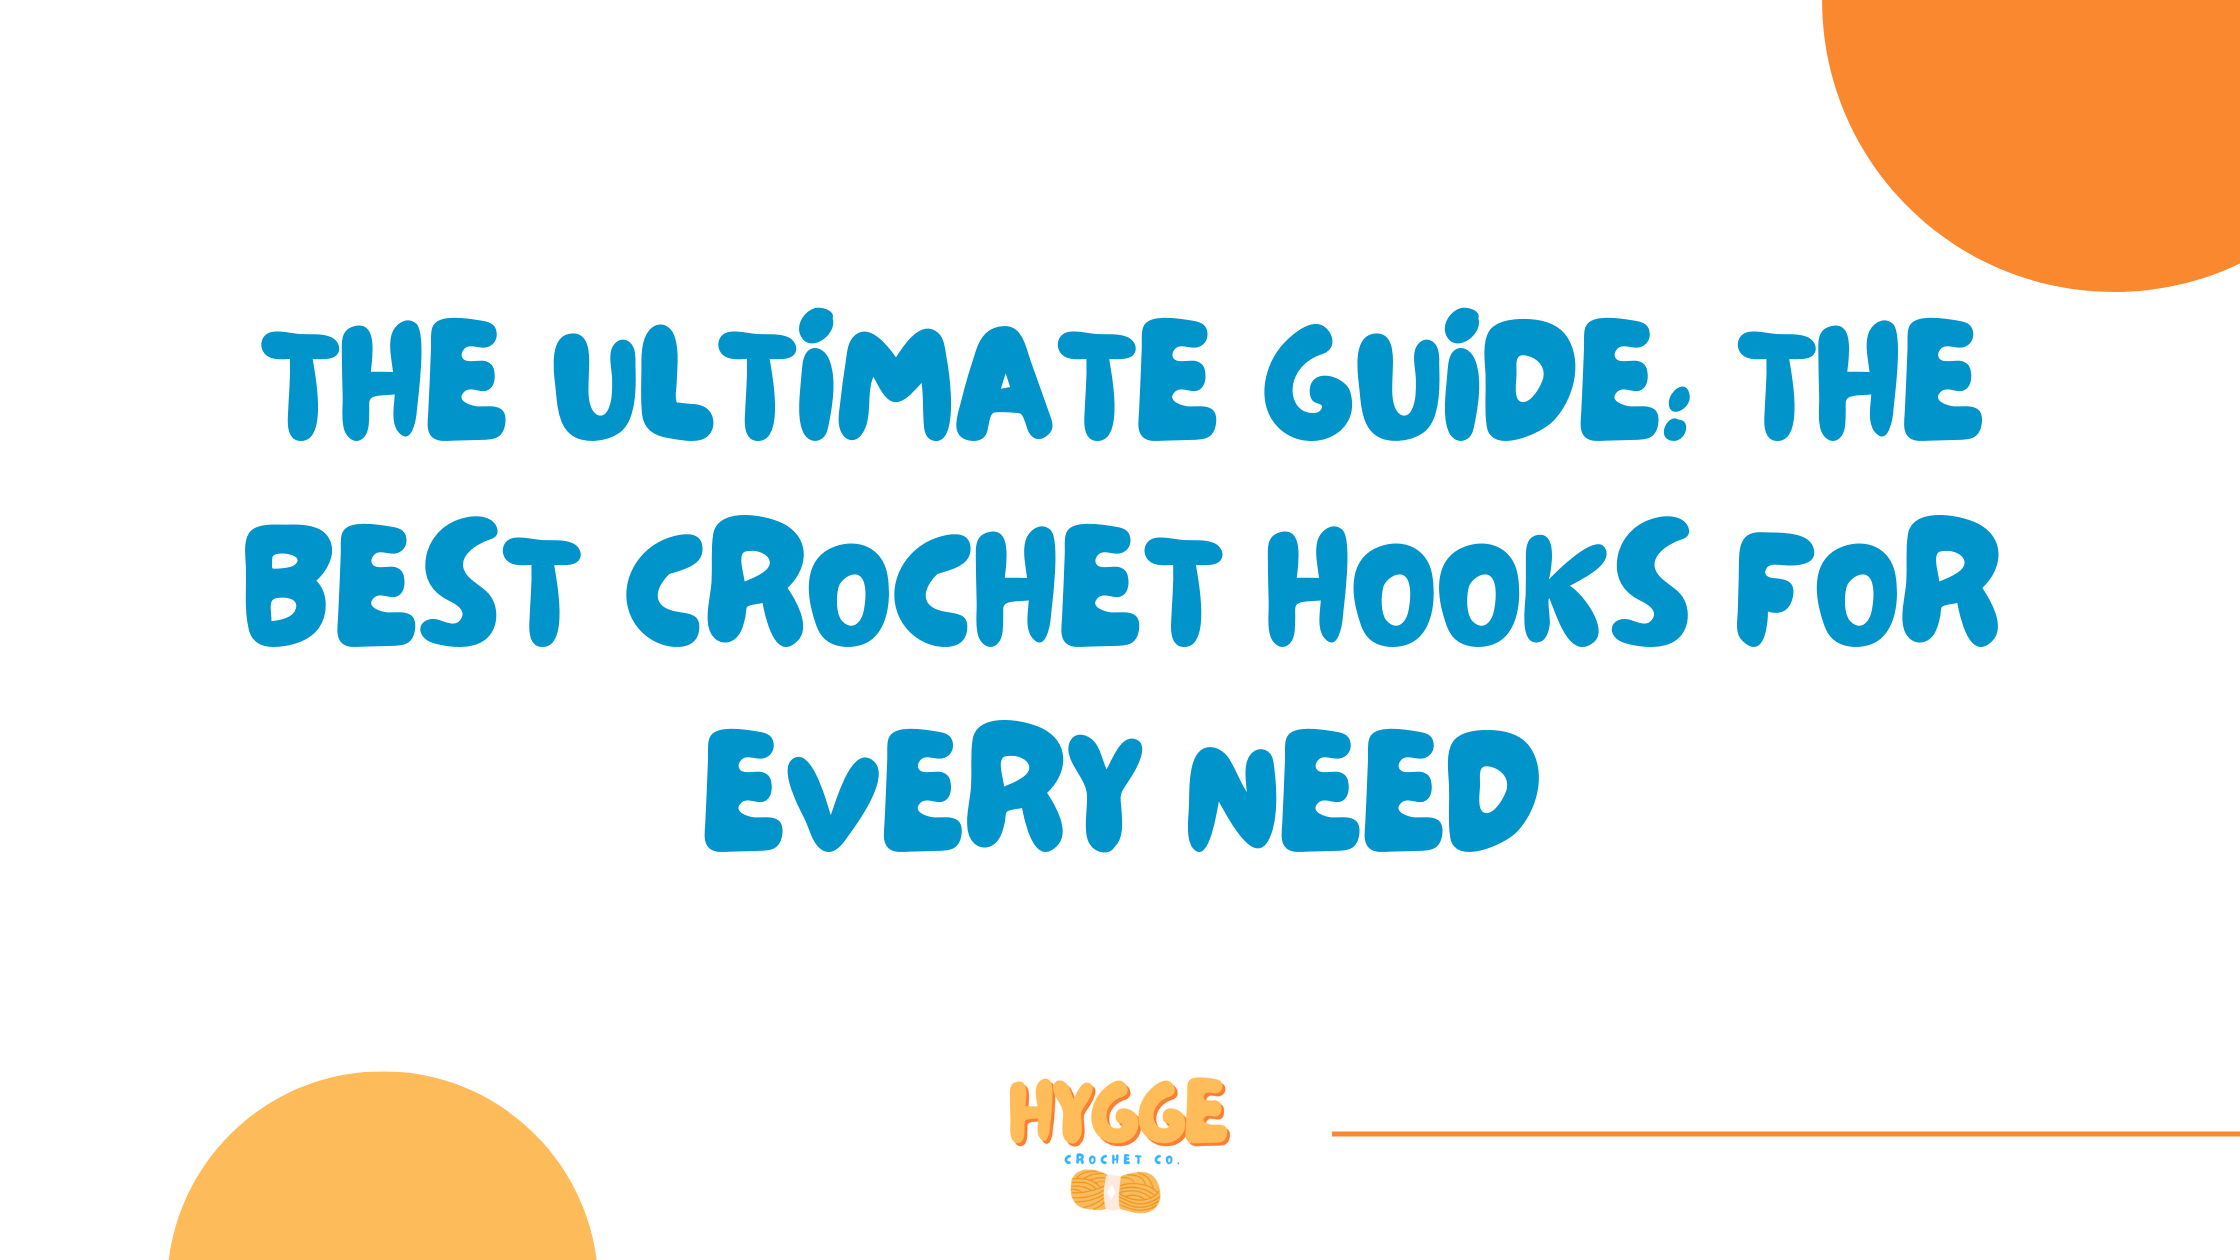 The Ultimate Guide: The Best Crochet Hooks for Every Need